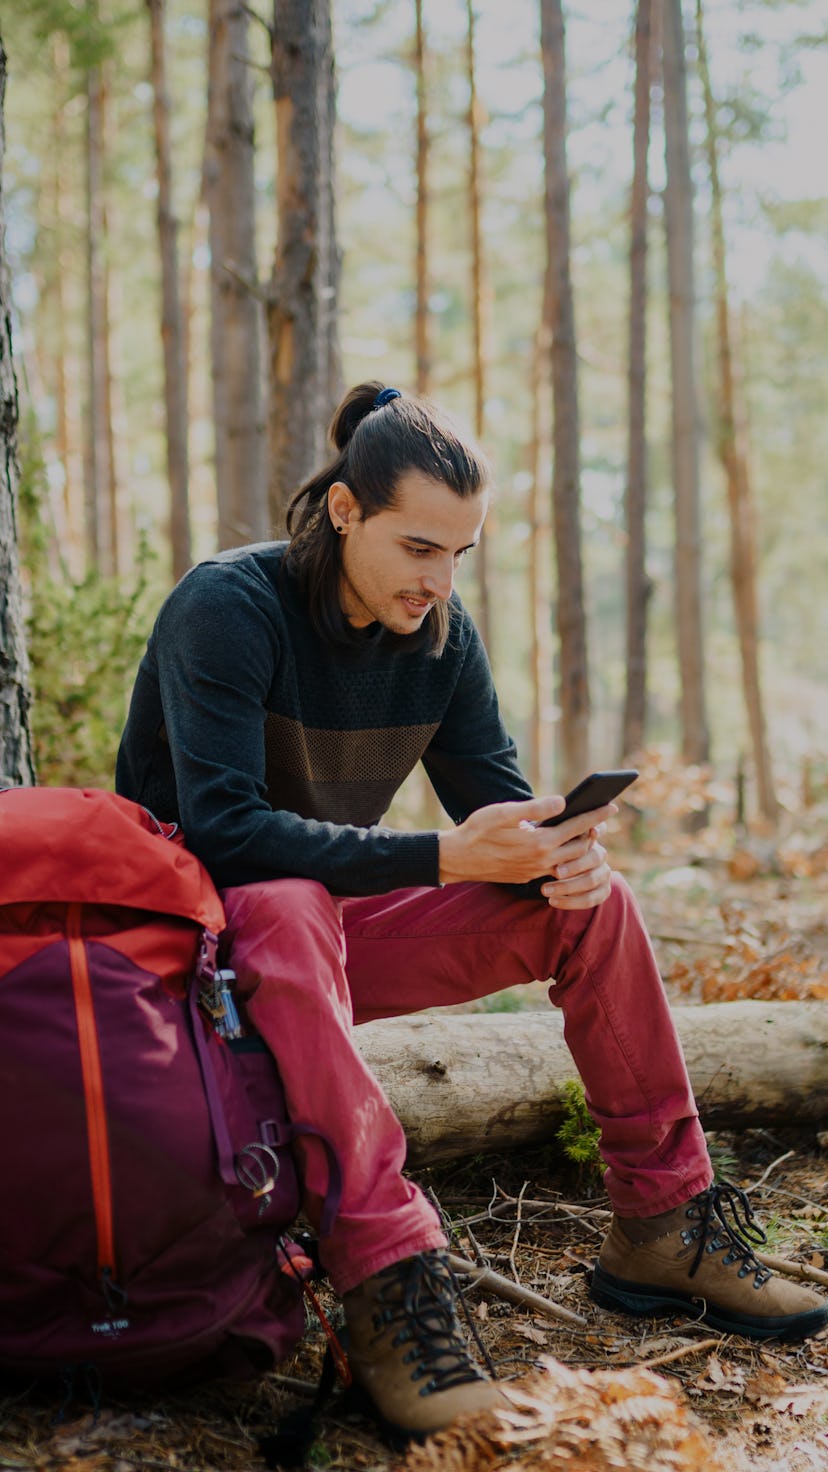 Young caucasian man using a smart phone in the nature.  Using technology in the nature concept.